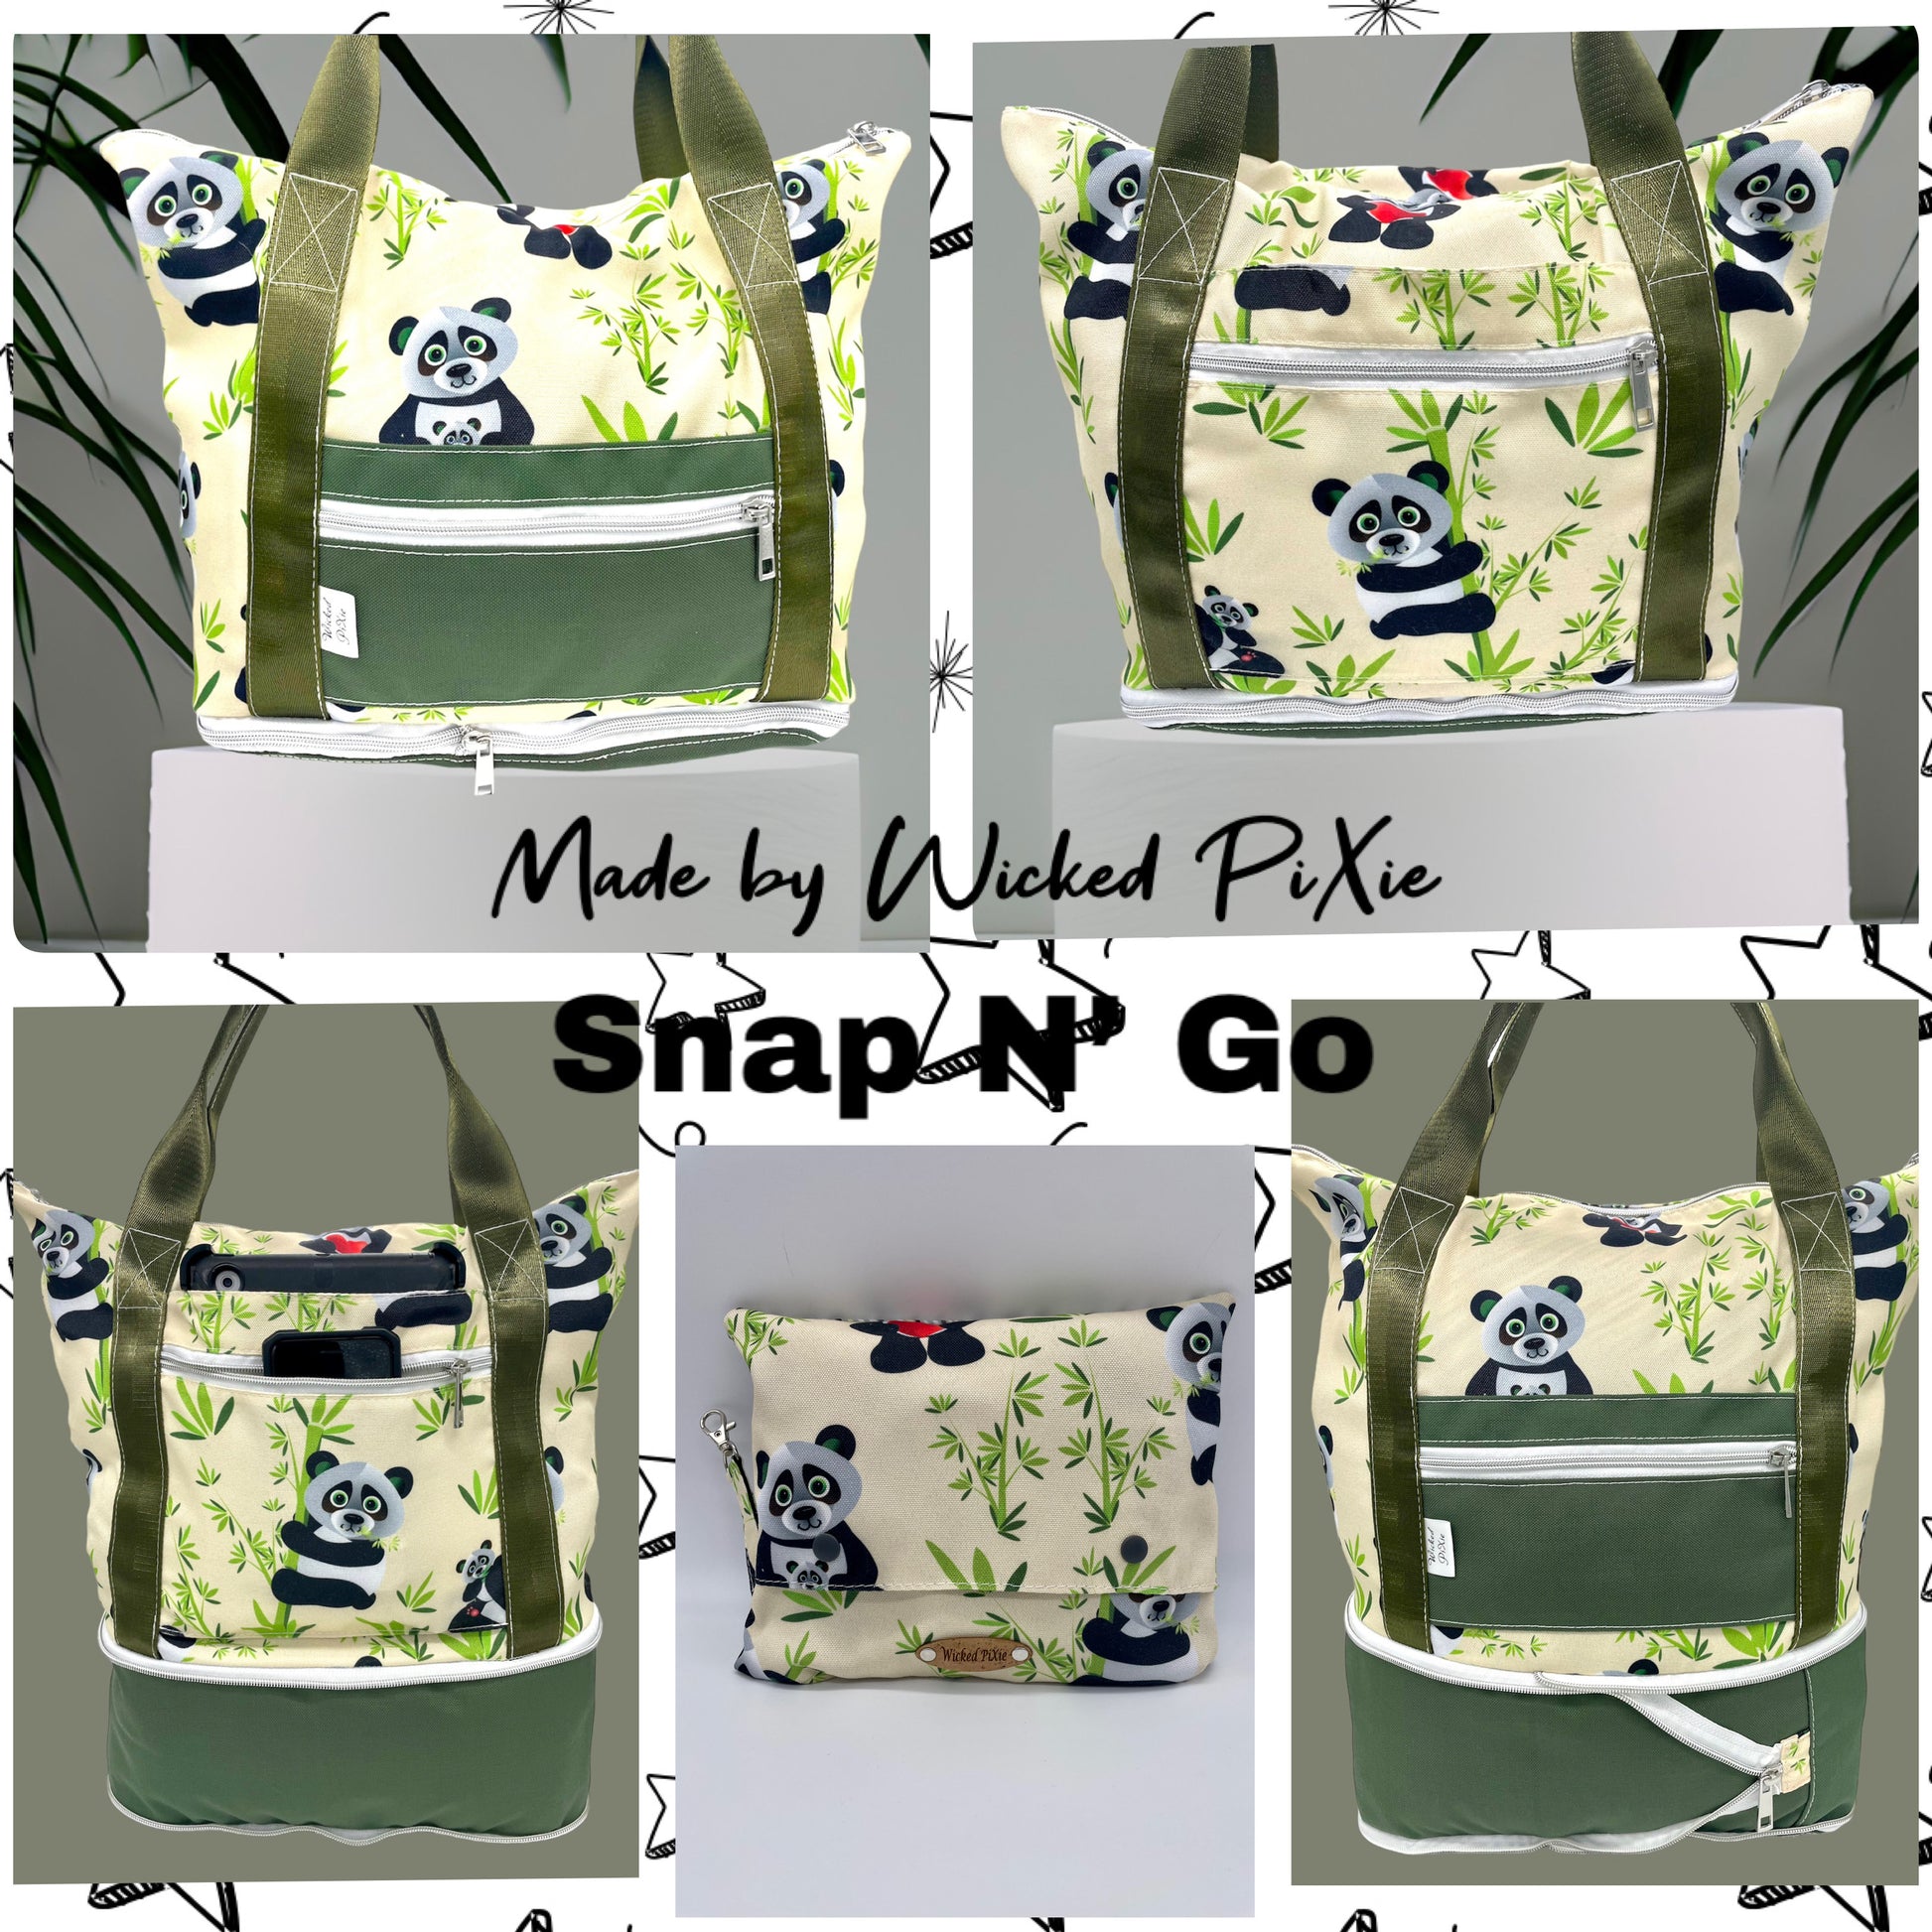 Xpandable SnapN'Go Tote Bag – Sewfisticated Craft Designs